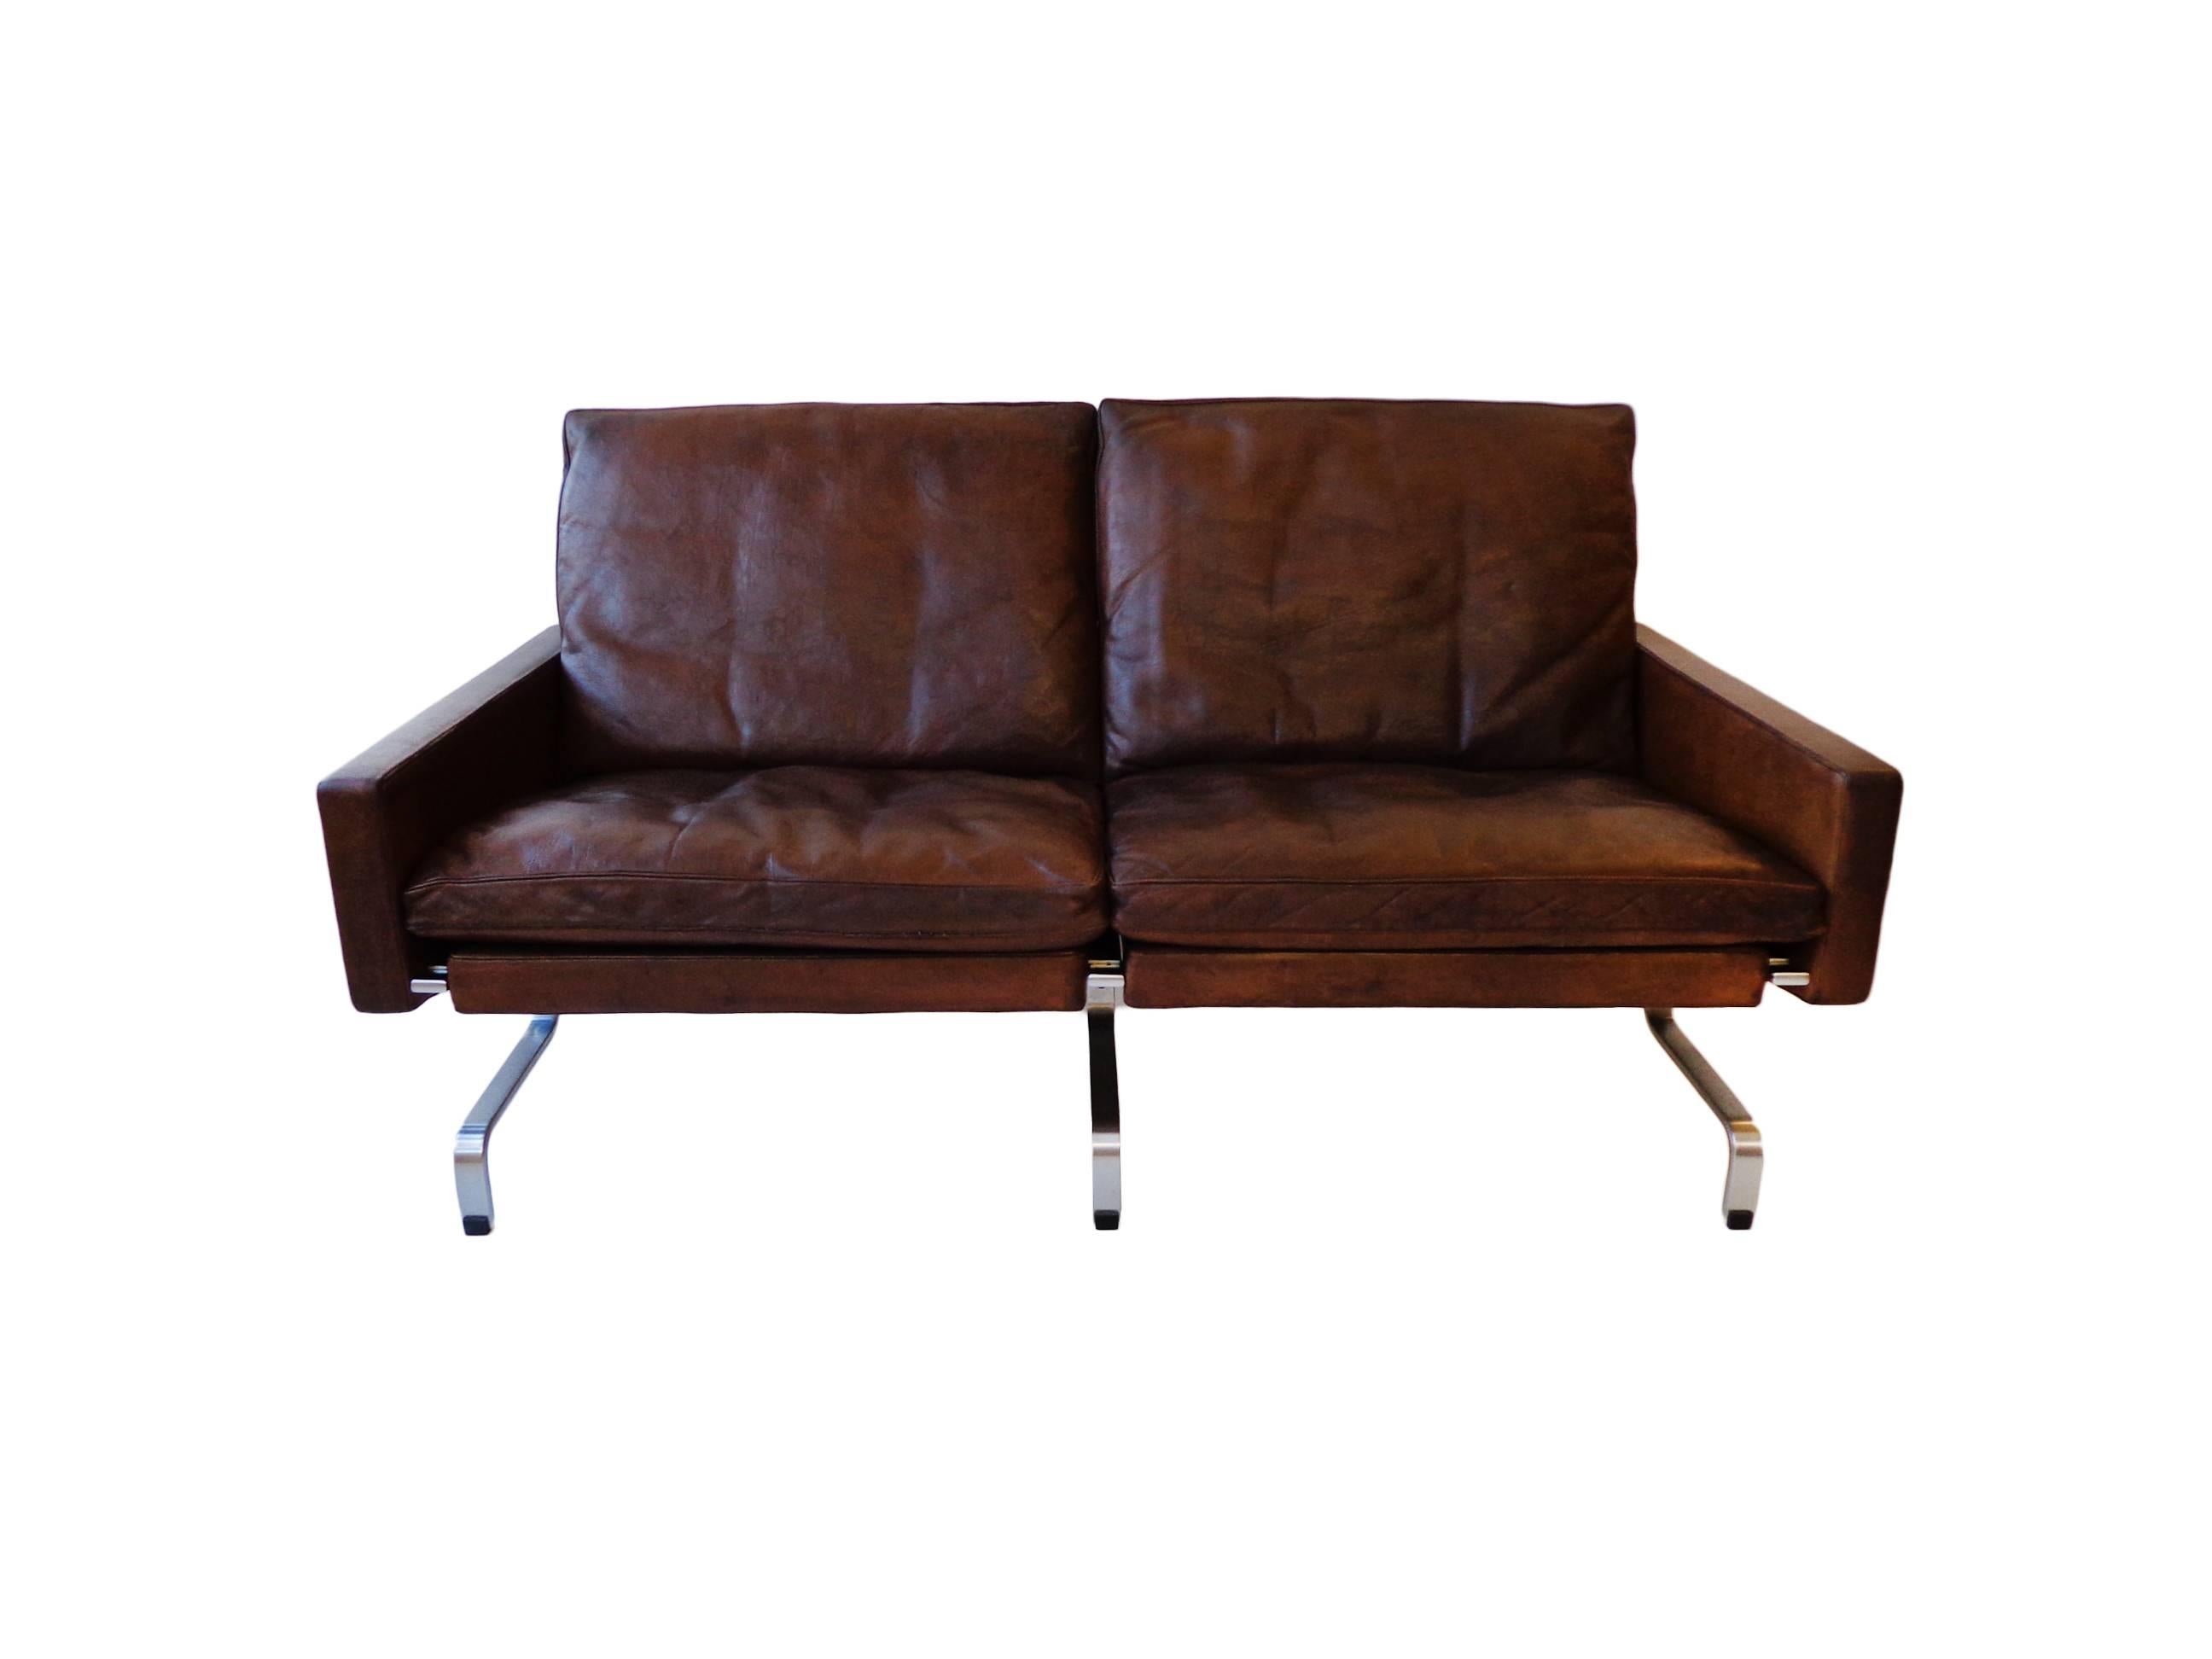 Offerd by Zitzo, Amsterdam: The sofa consisted steel side frames that included the front and back legs and were joined beneath the seat by a rectangular steel bar. Seat, back and side panels are coverd in original patinated leather.

Signed ith